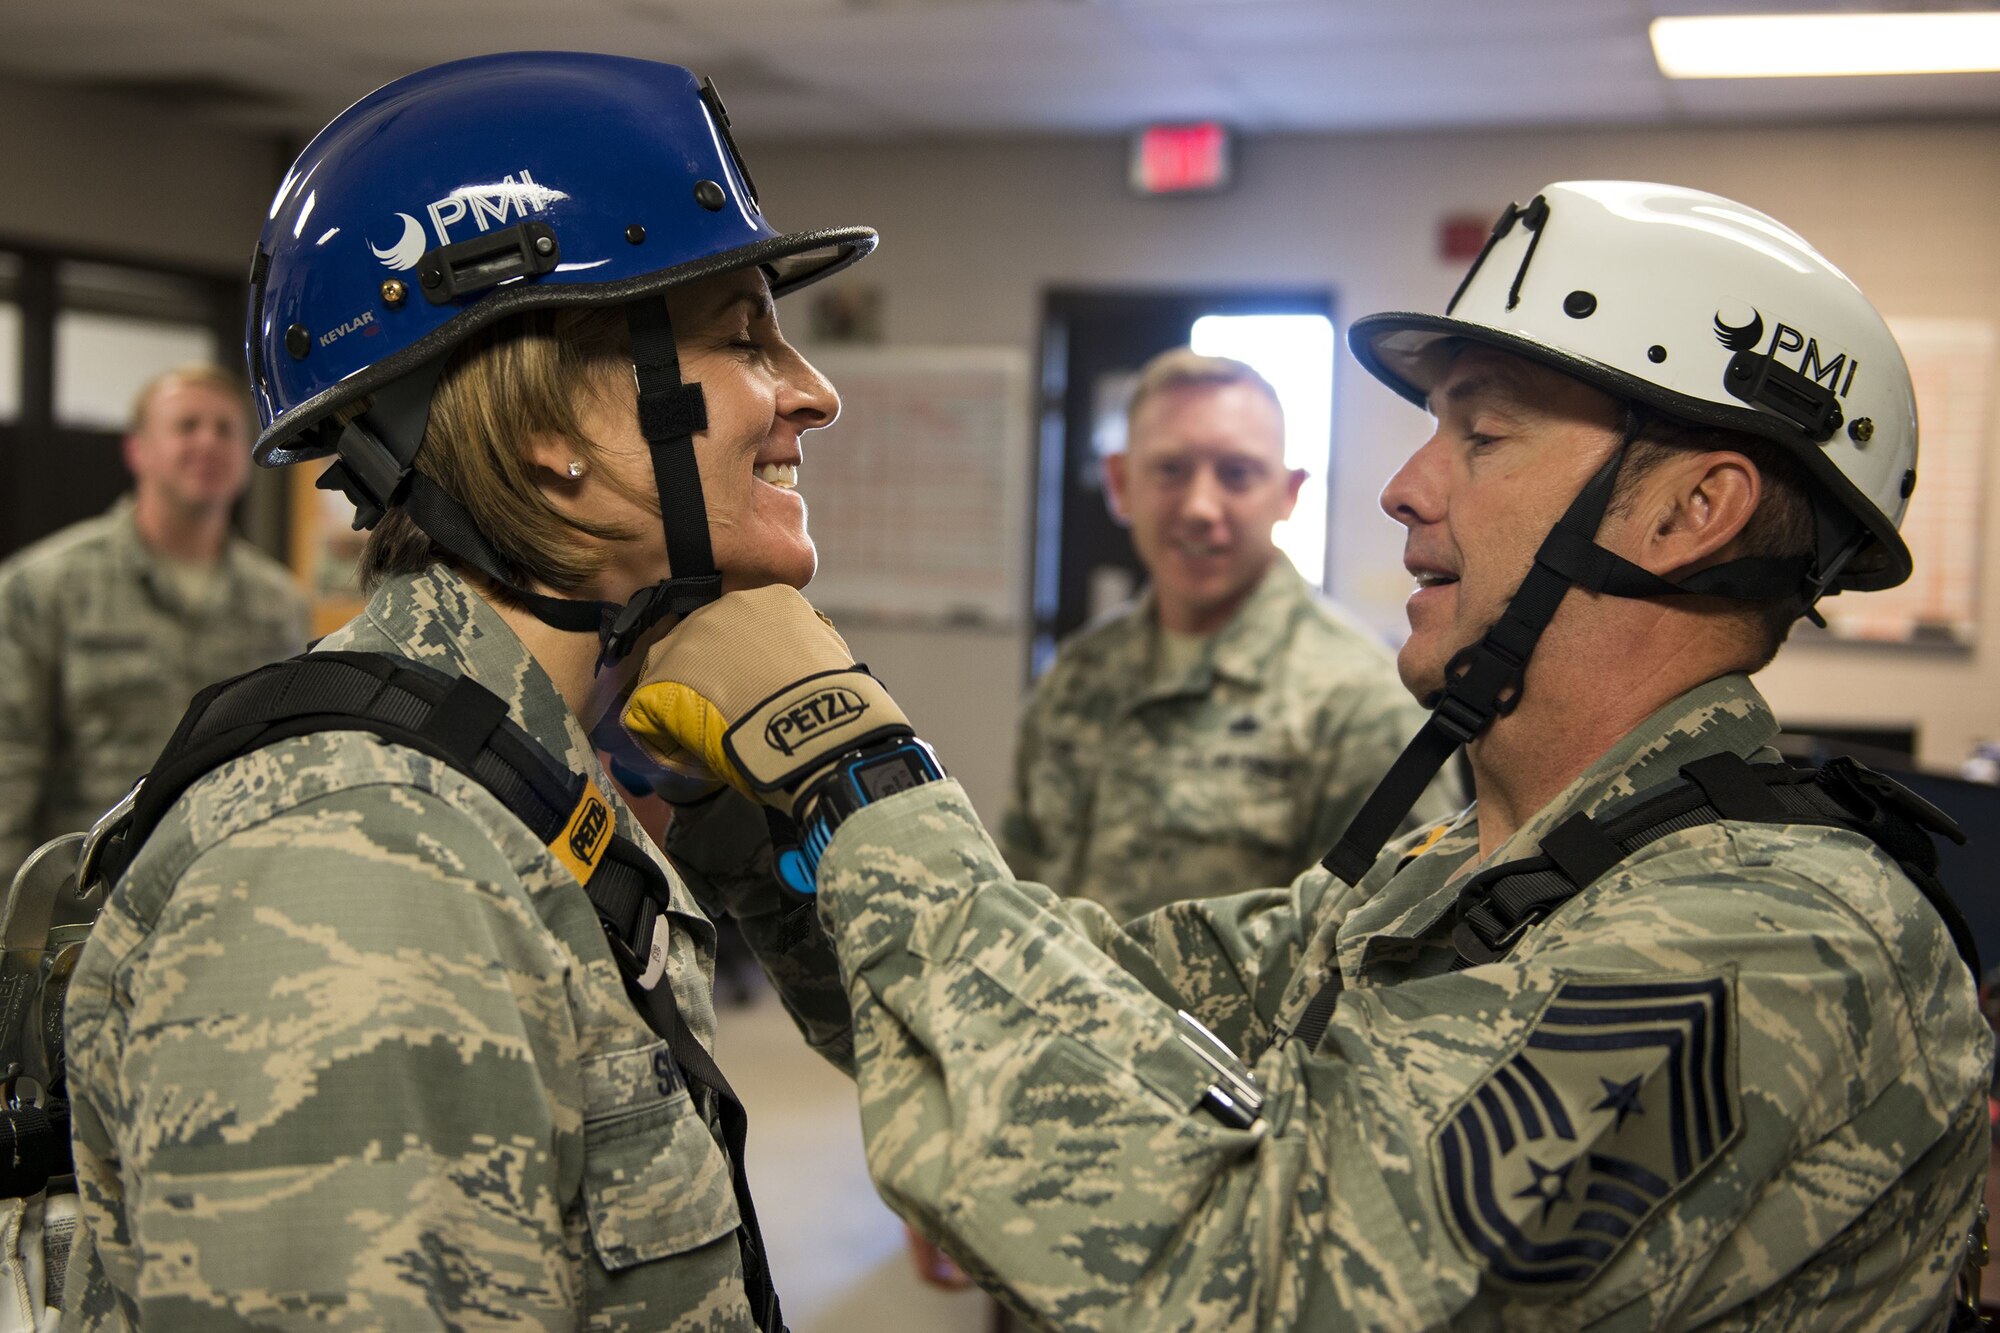 Chief Master Sgt. Jarrod Sebastian, right, 23d Wing command chief, adjusts Col. Jennifer Short’s, 23d Wing commander, helmet before they climb a radio antenna tower as part of an immersion tour, Dec. 11, 2017, at Moody Air Force Base, Ga. Moody leadership visited the radar, airfield and weather systems facility to familiarize themselves with the 23d Operations Support Squadron’s duties and to gain a better understanding of how they impact the mission. (U.S. Air Force photo by Airman 1st Class Erick Requadt)